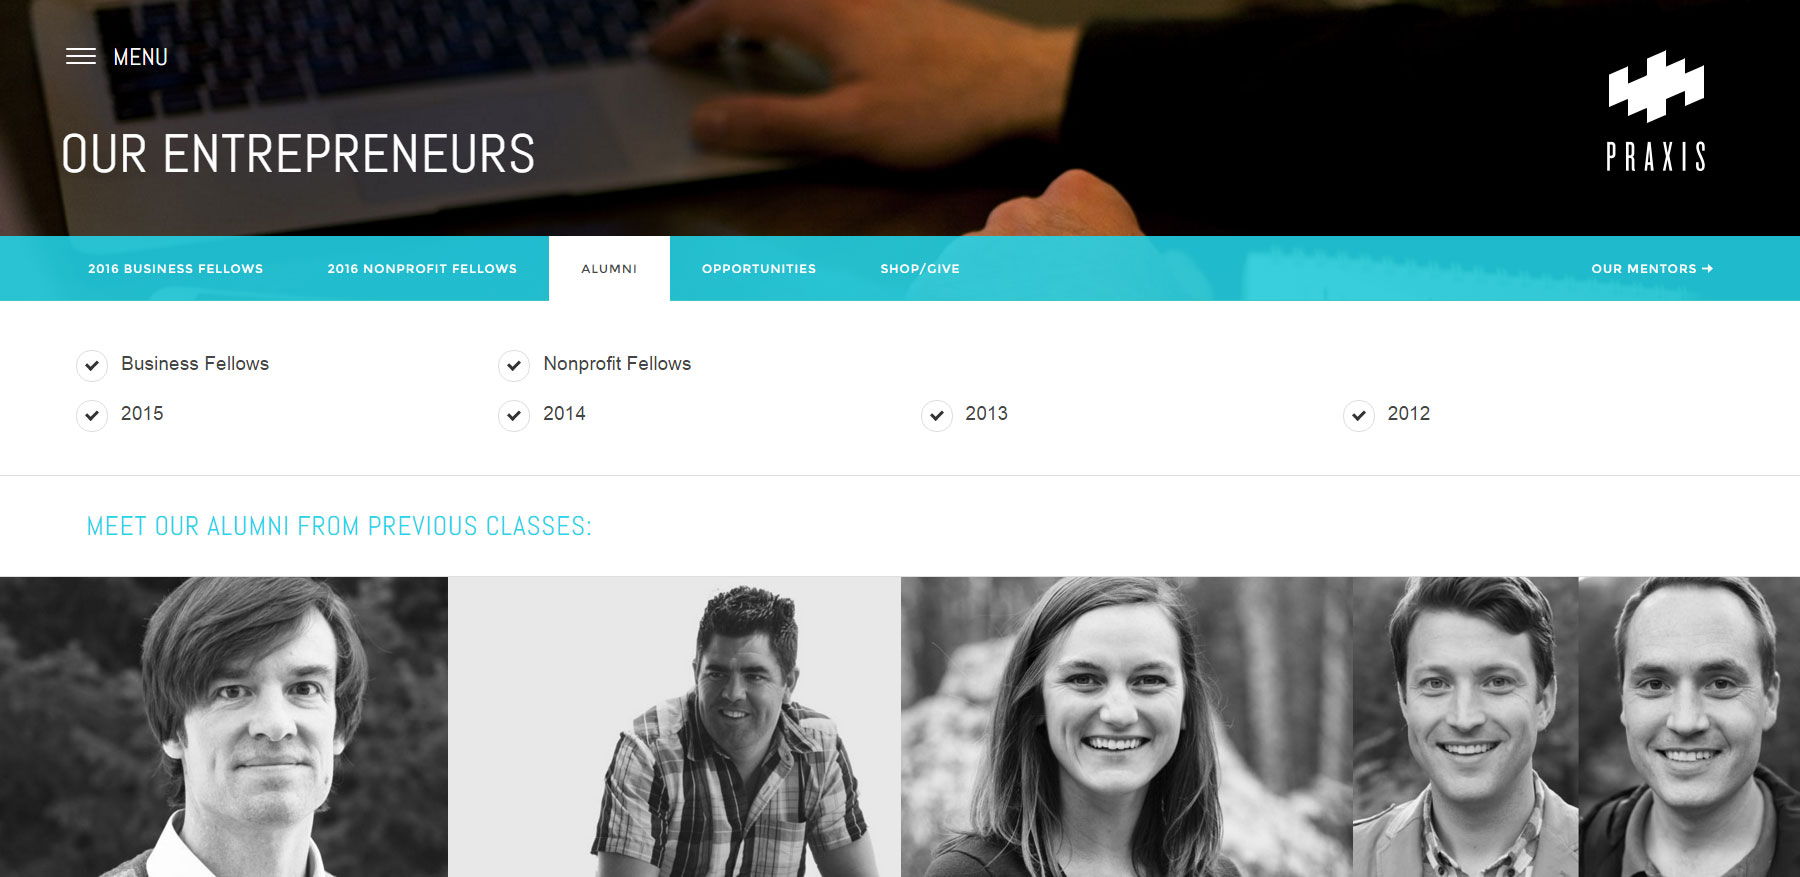 Praxis Social Accelerator - Website of the Day